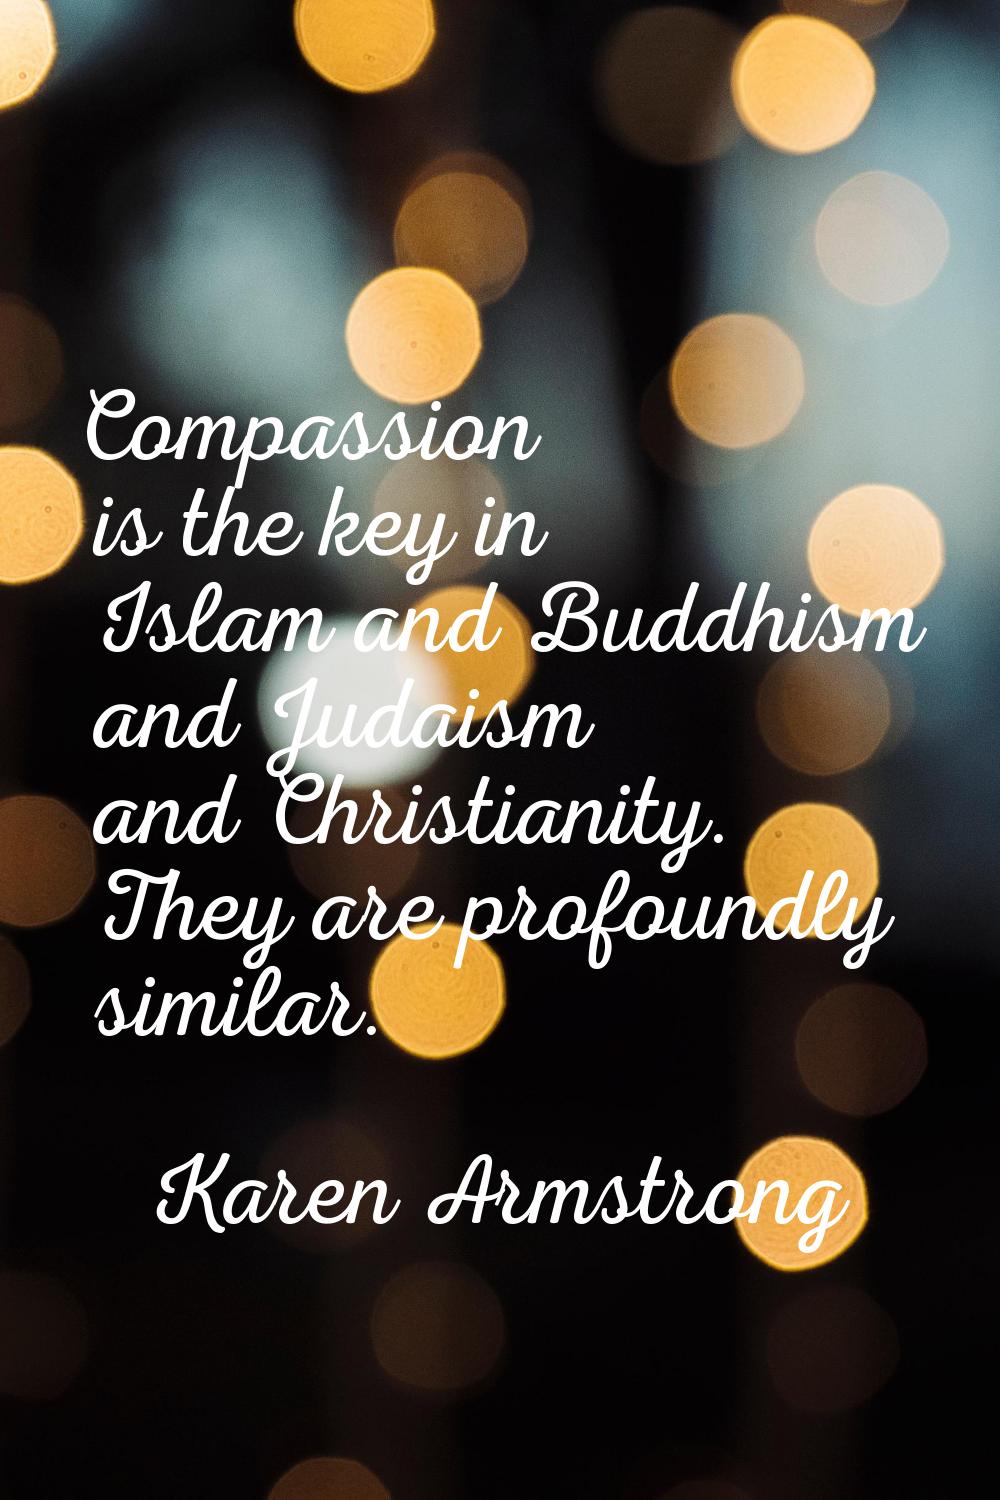 Compassion is the key in Islam and Buddhism and Judaism and Christianity. They are profoundly simil